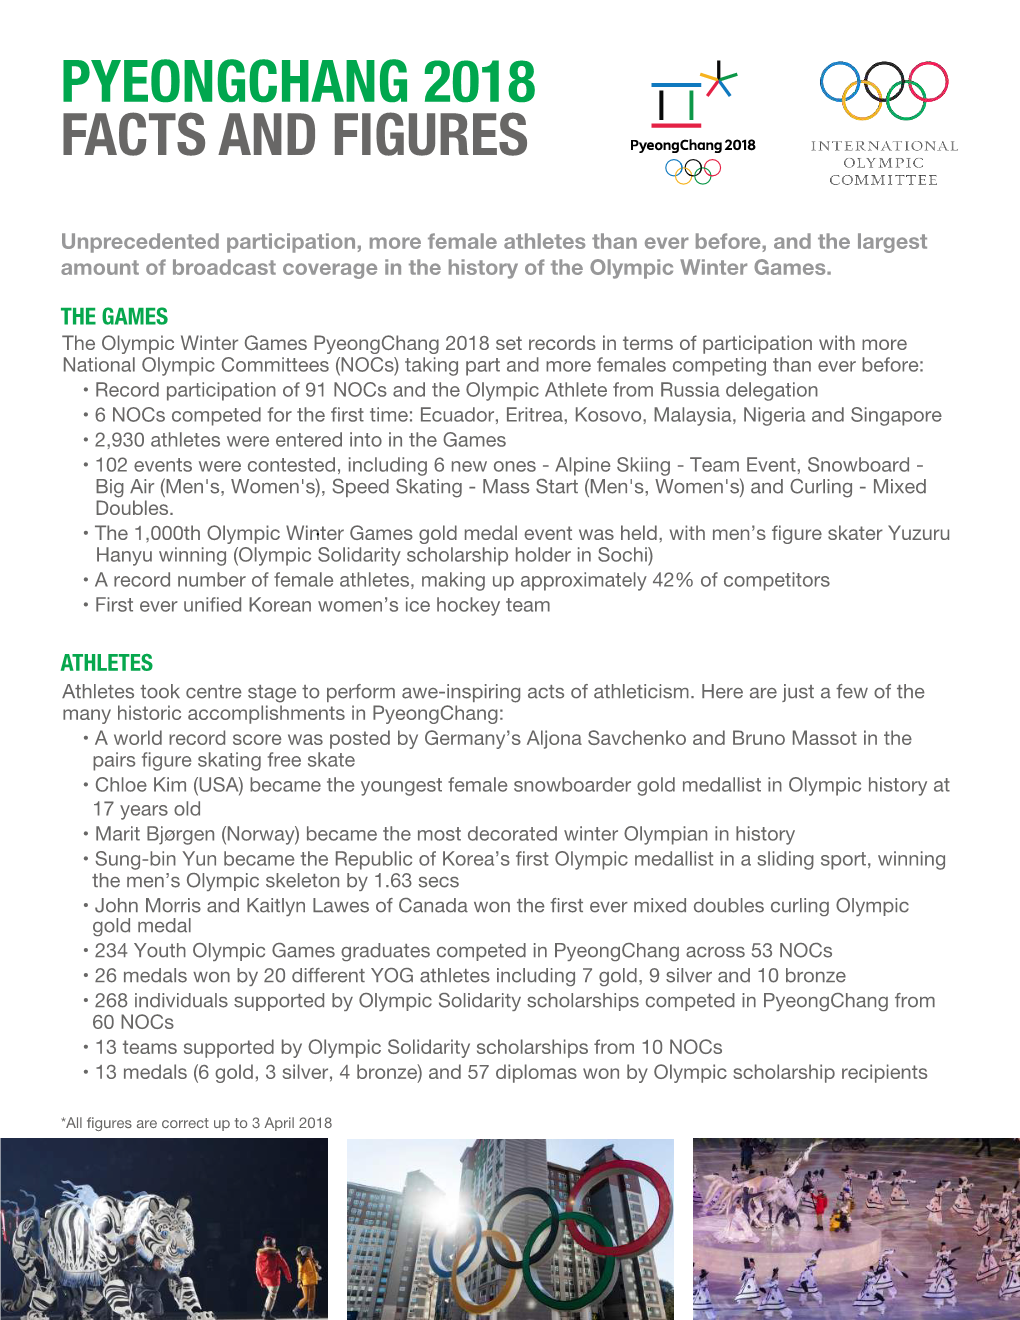 Pyeongchang 2018 Facts and Figures